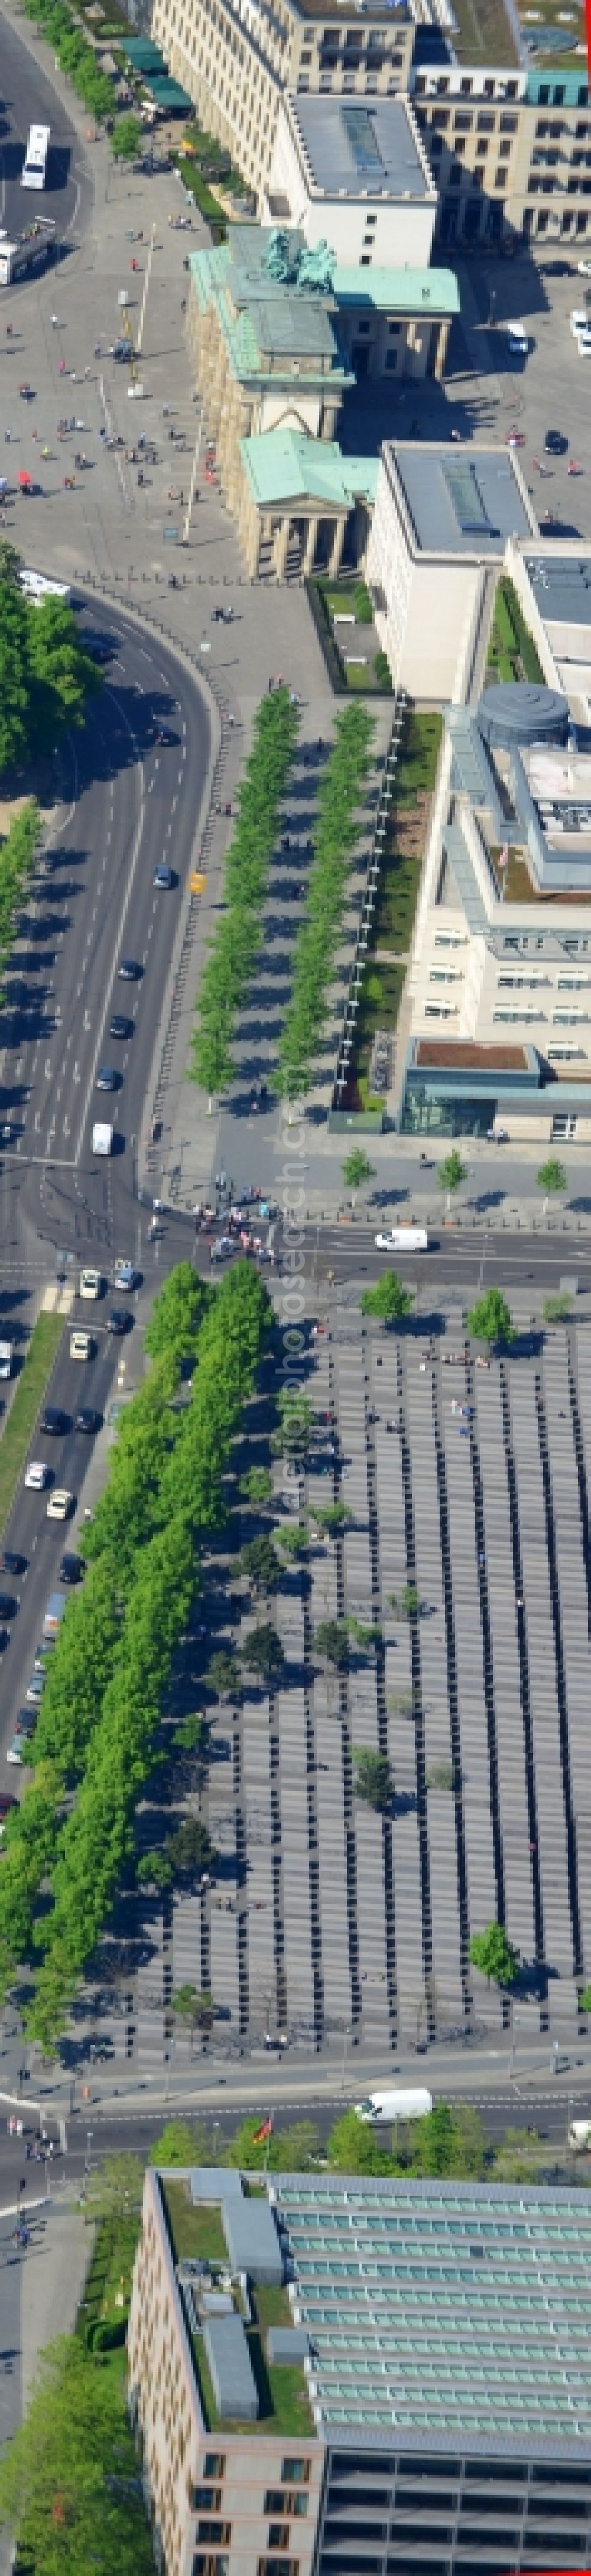 Aerial image Berlin - View of the Holocaust Memorial in Berlin in the homonymous state